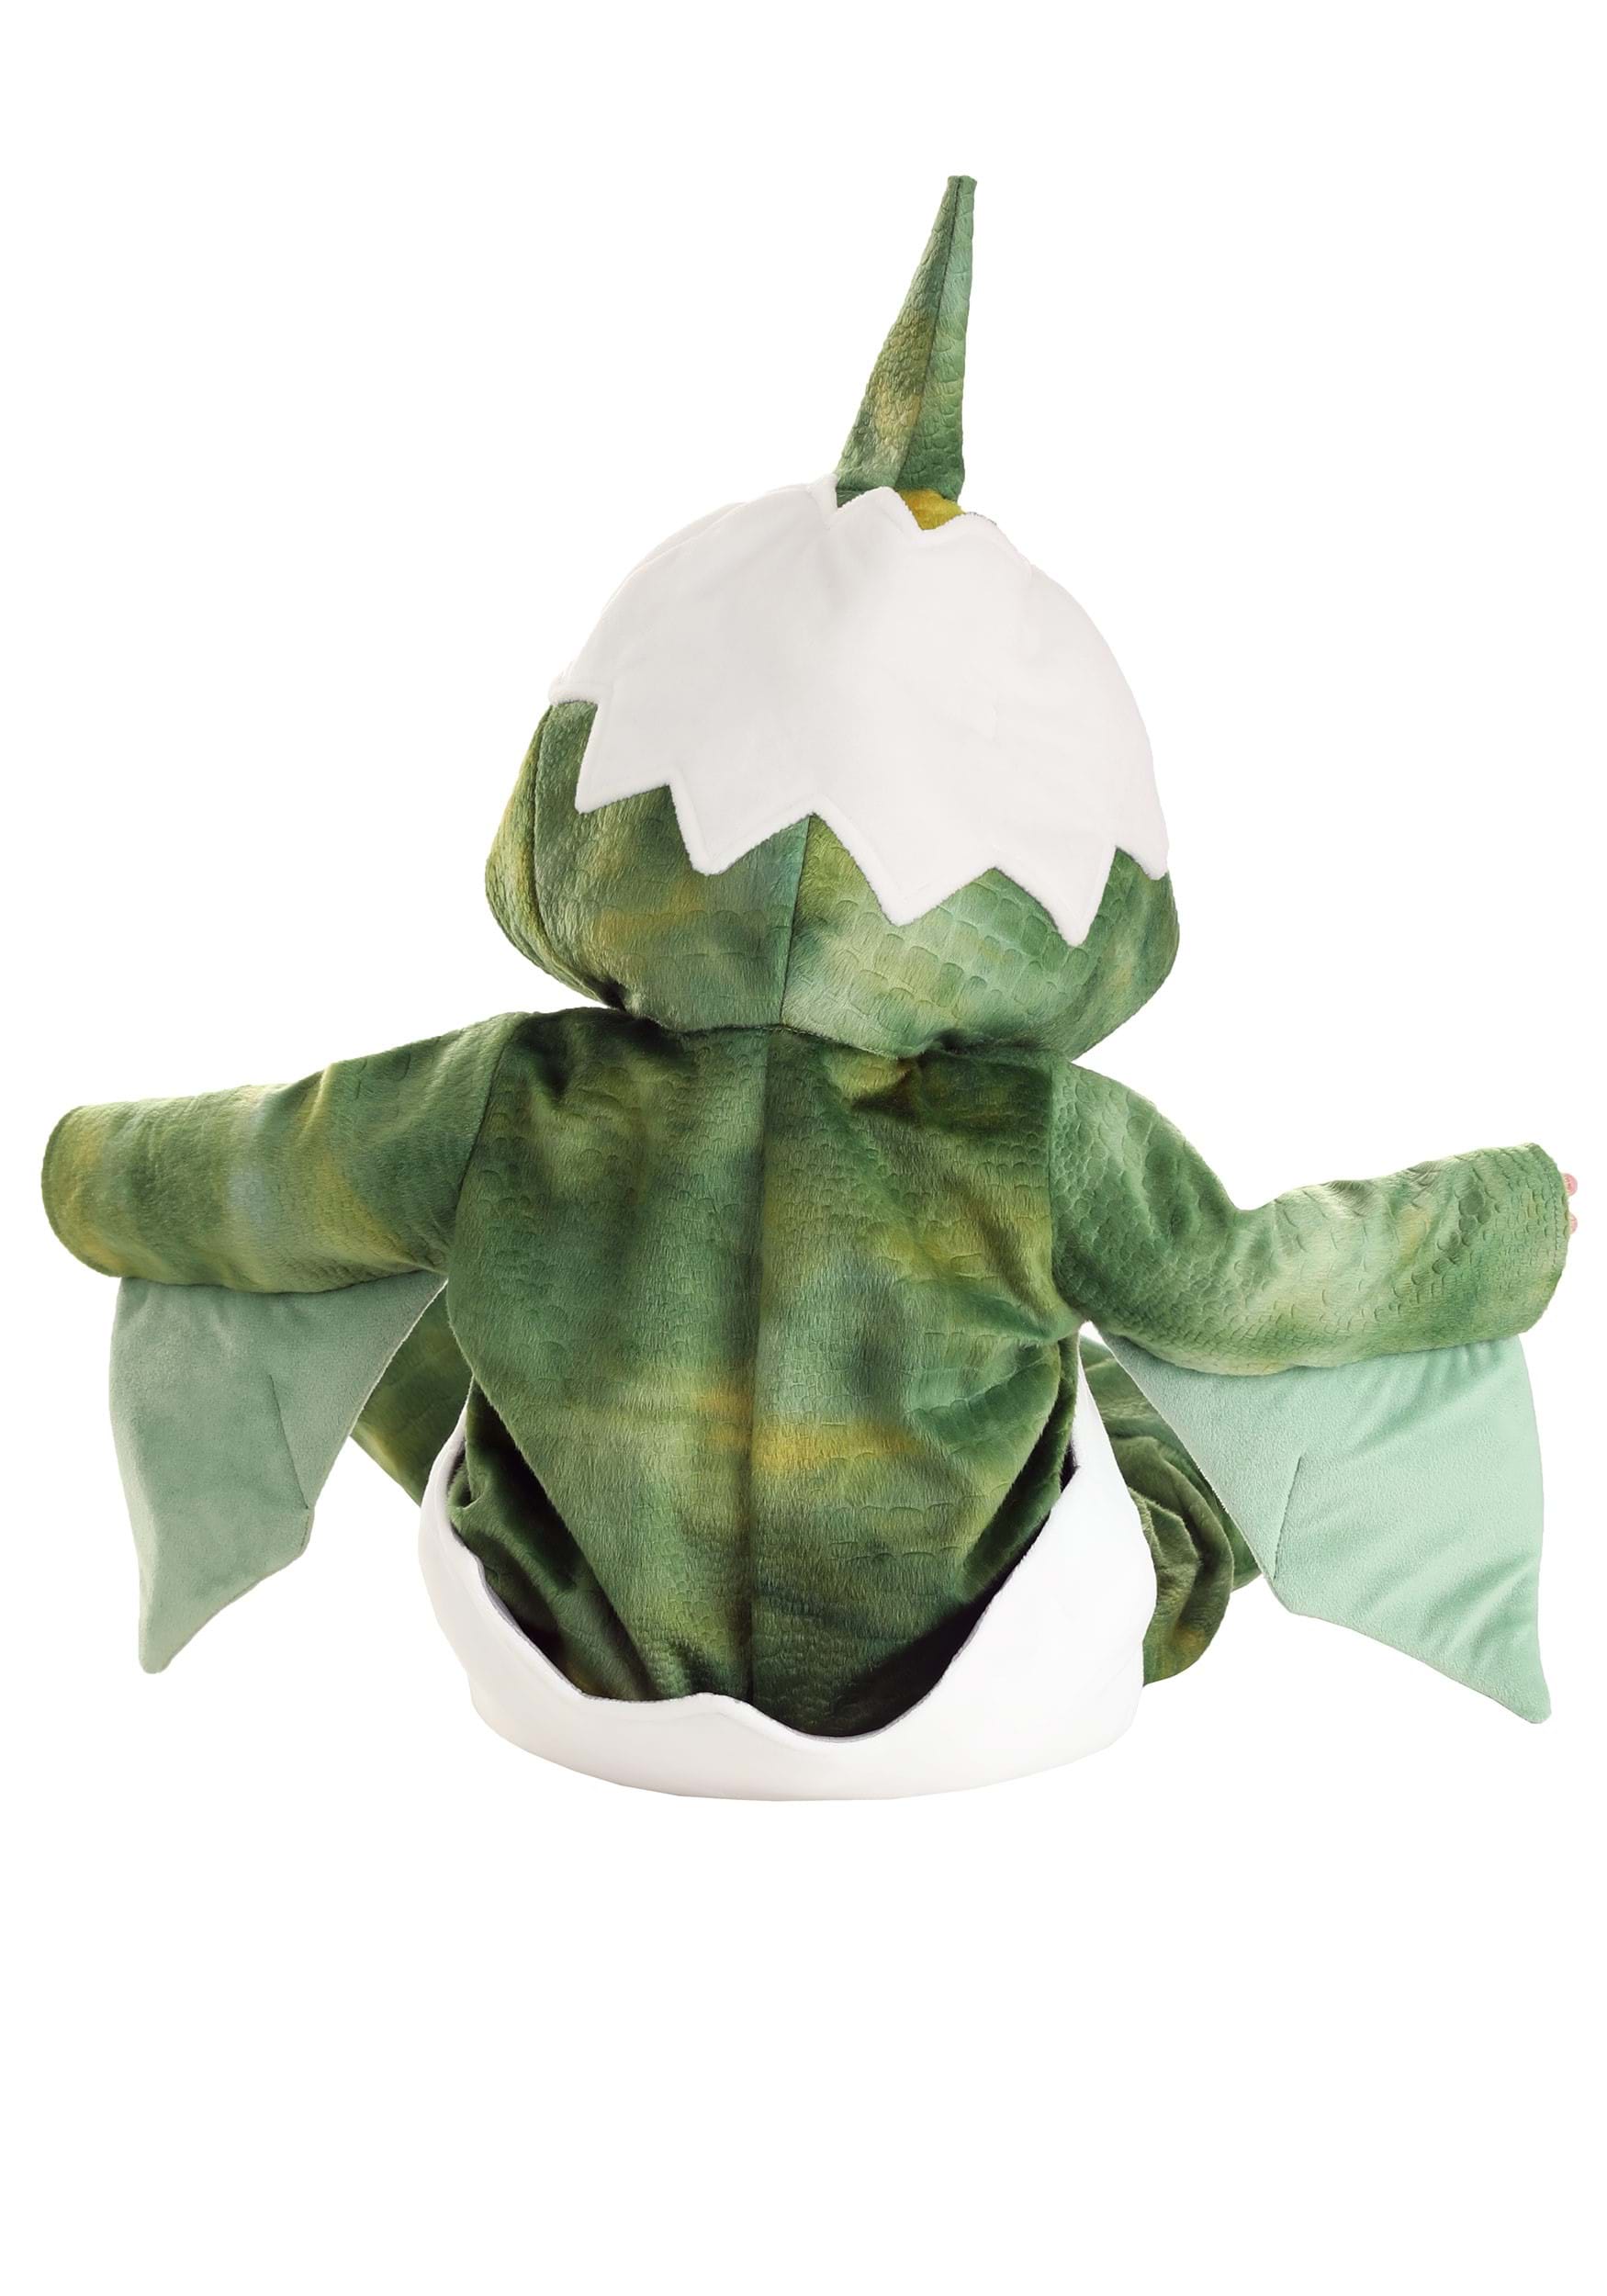 HalloweenCostumes.com 0-3 Months Hatching Pterodactyl Infant Costume.,  White/Green/Green